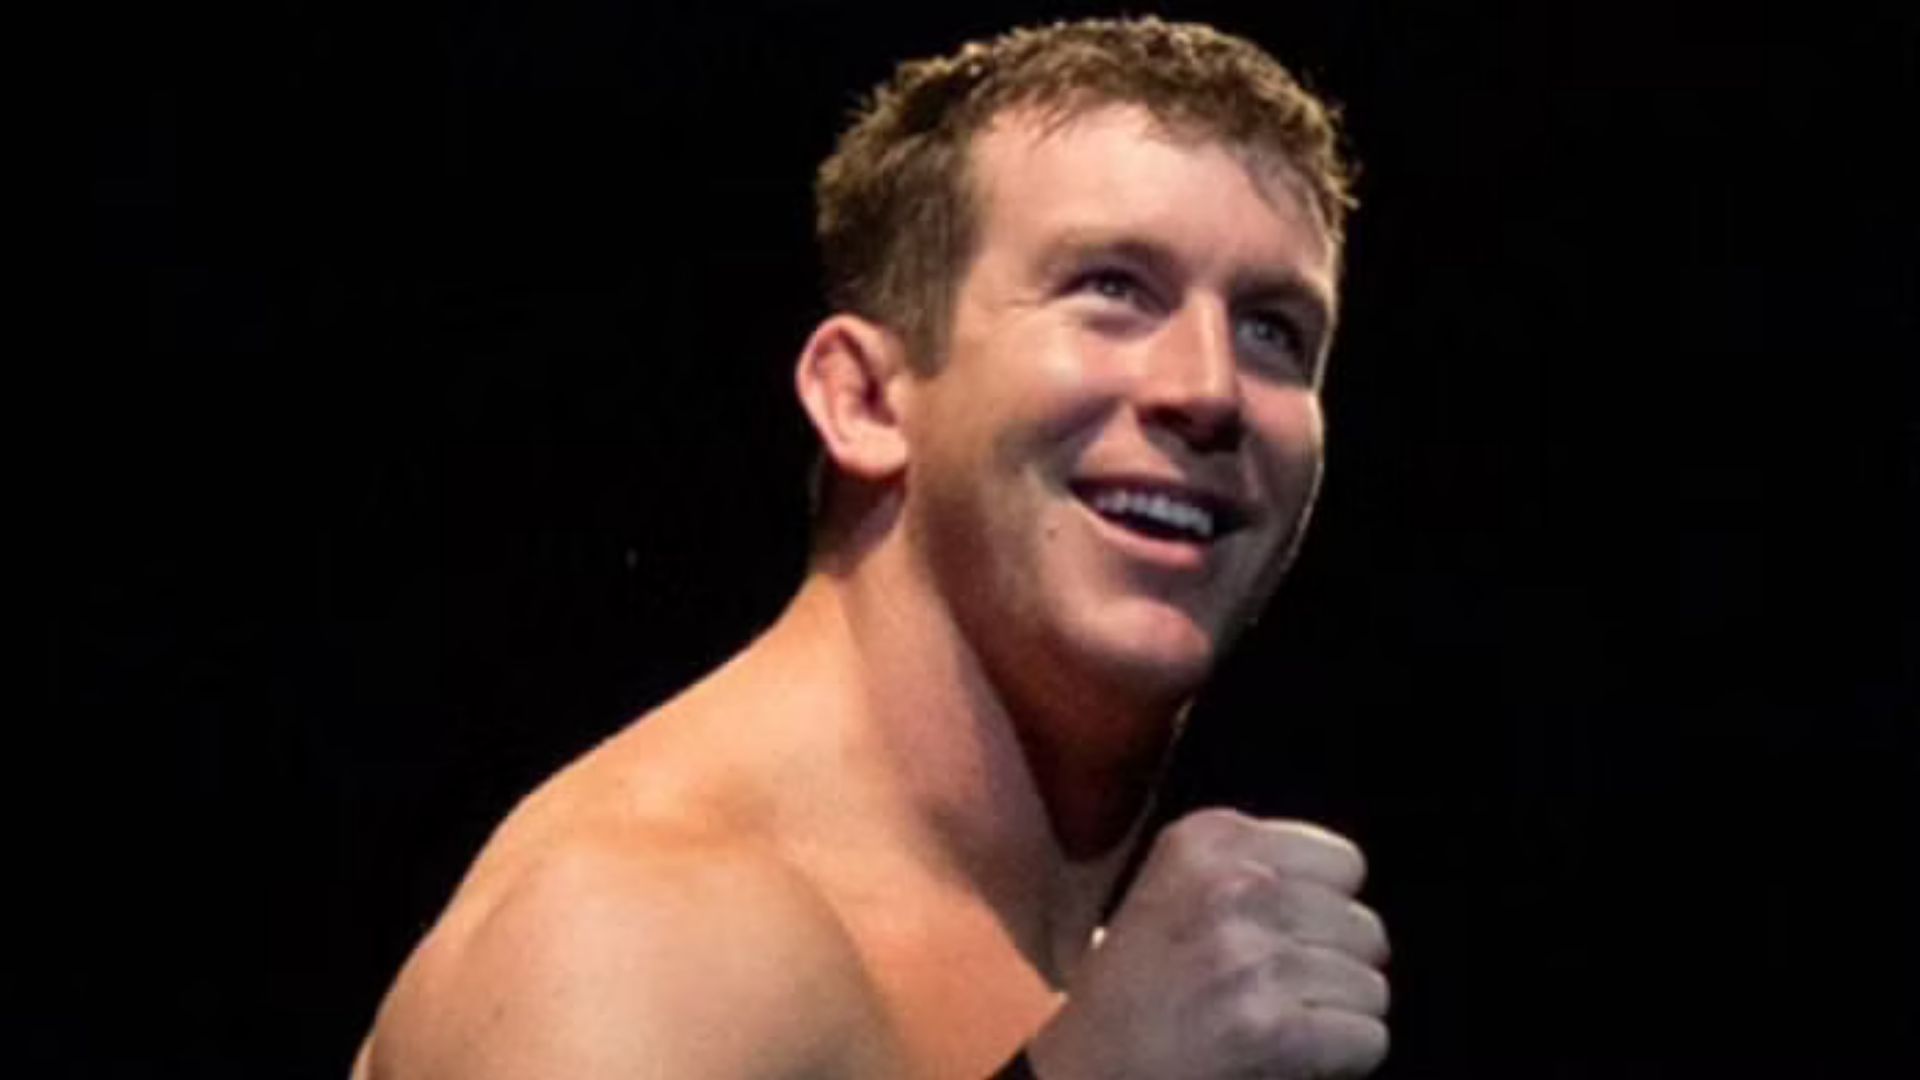 Ted DiBiase Jr. had a great start as part of Legacy, but things went downward soon